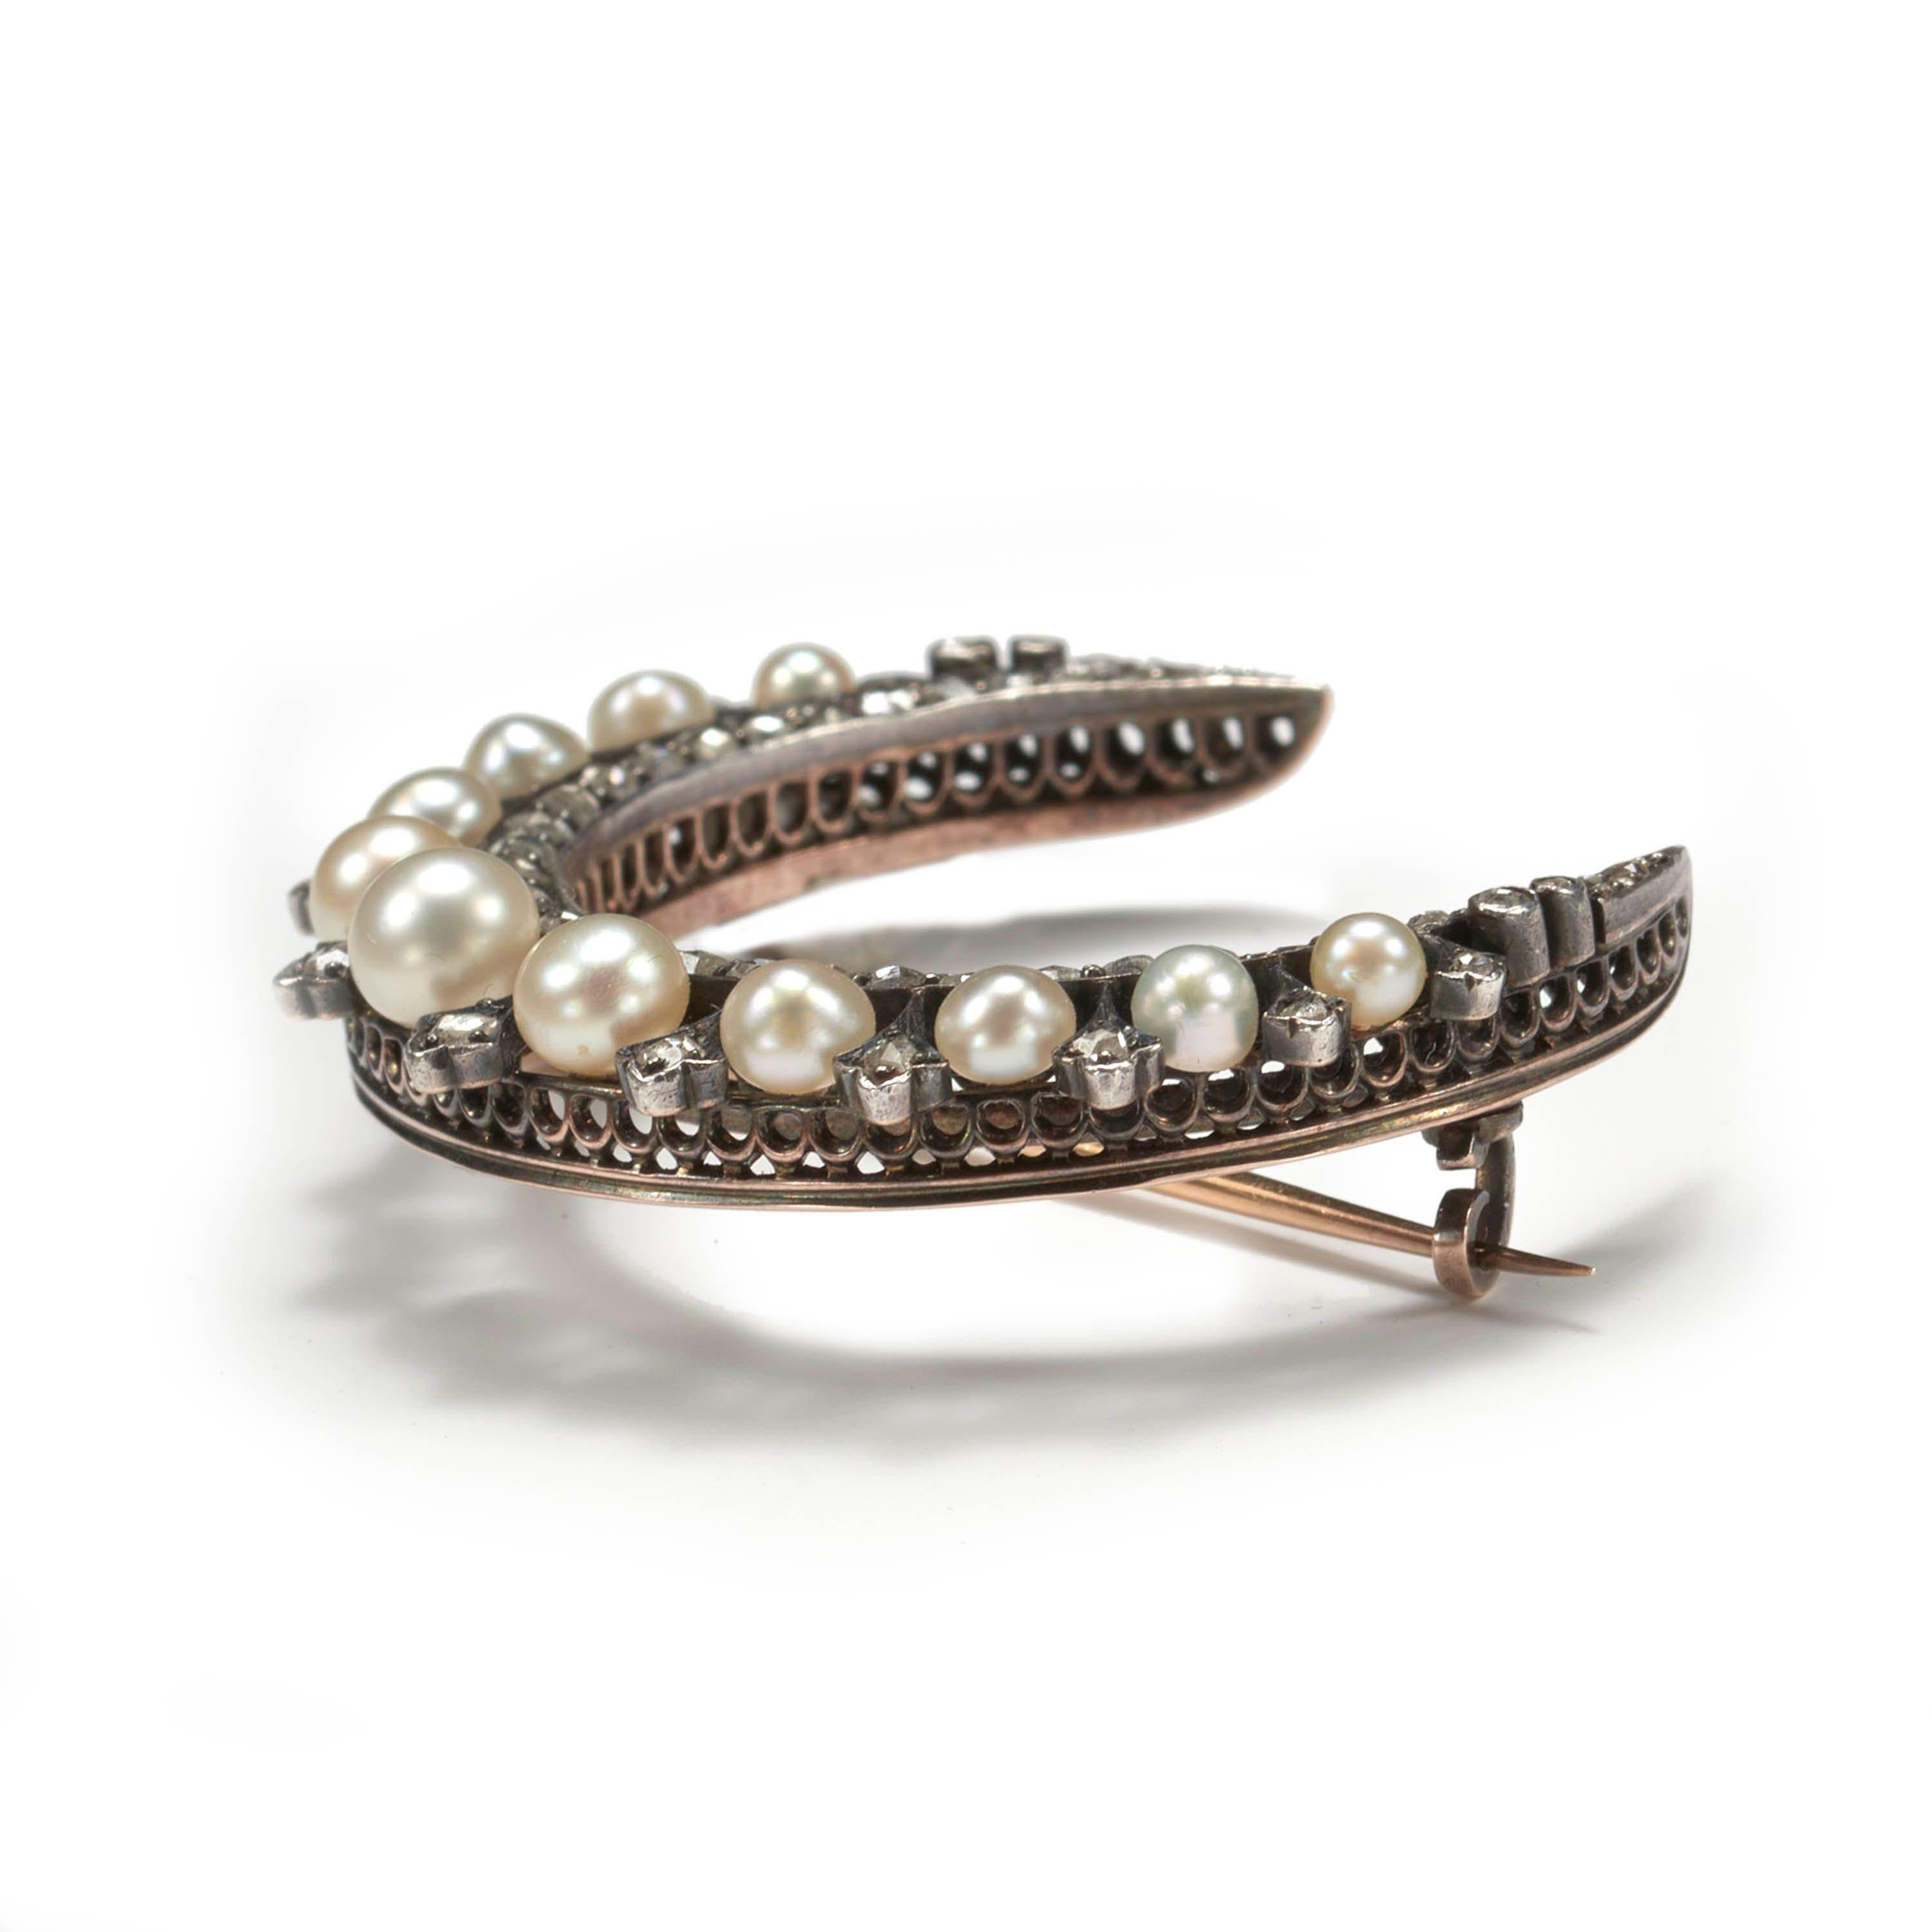 An antique crescent brooch, set with natural pearls, graduating from the centre, spaced with tapered settings with rose-cut diamonds, and an inner row, grain set with rose-cut diamonds, mounted in silver-upon-gold, on a gold pierced gallery, circa